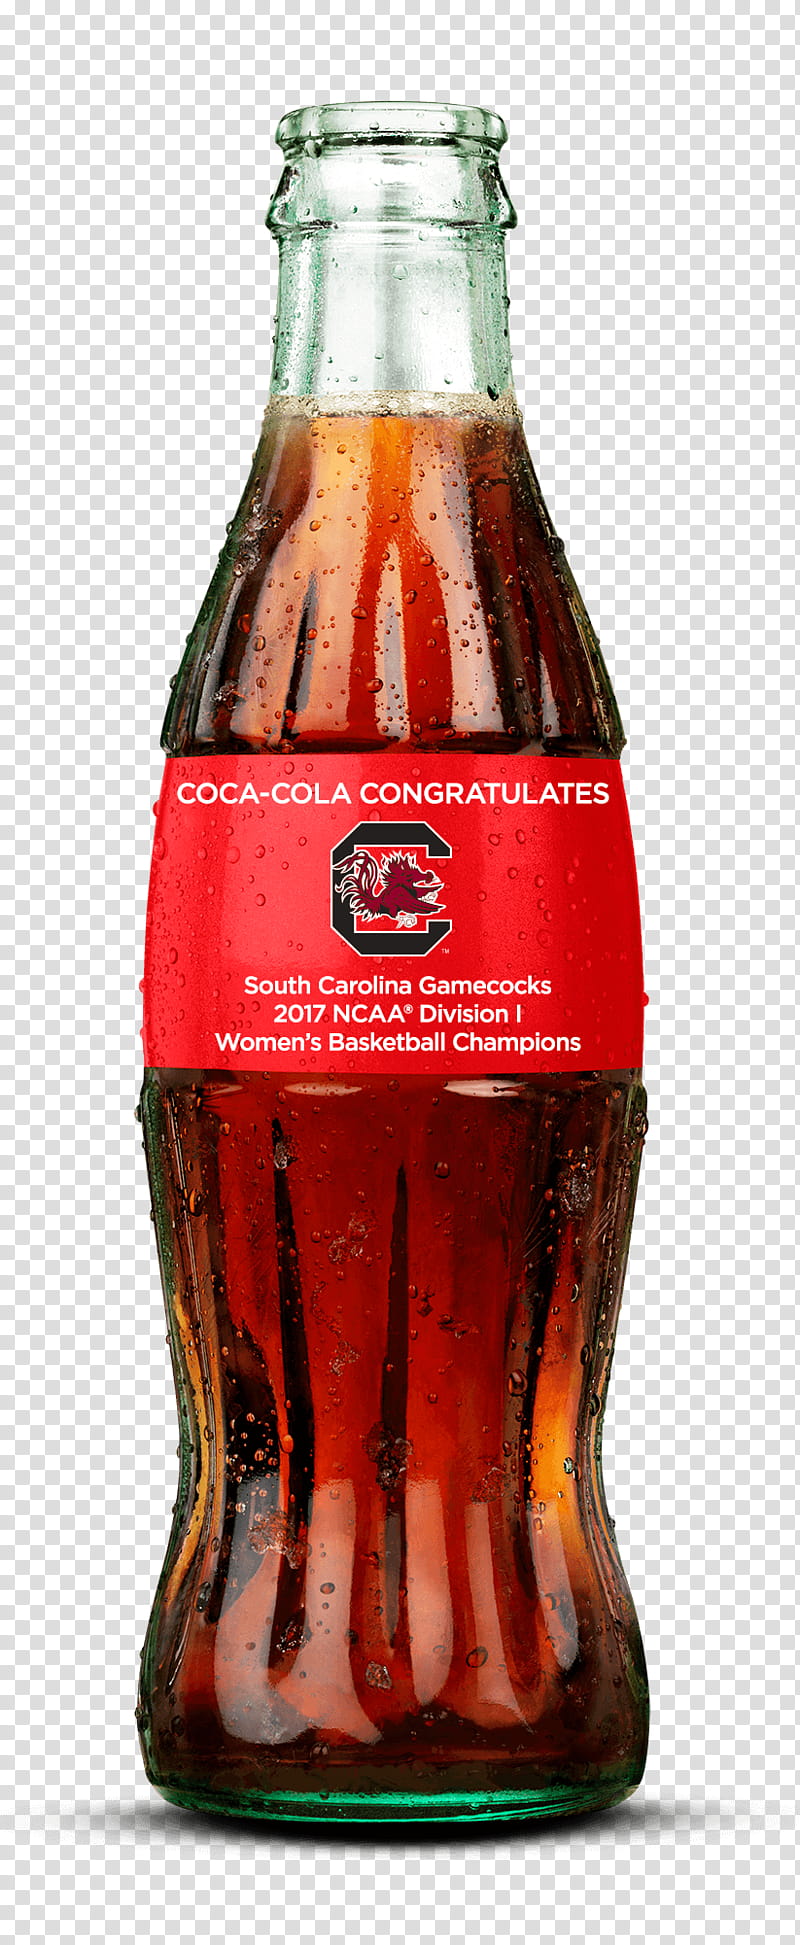 Coke Can, Fizzy Drinks, Cocacola, World Of Cocacola, Diet Coke, Green Cocacola Bottles, Share A Coke, Bouteille De Cocacola transparent background PNG clipart